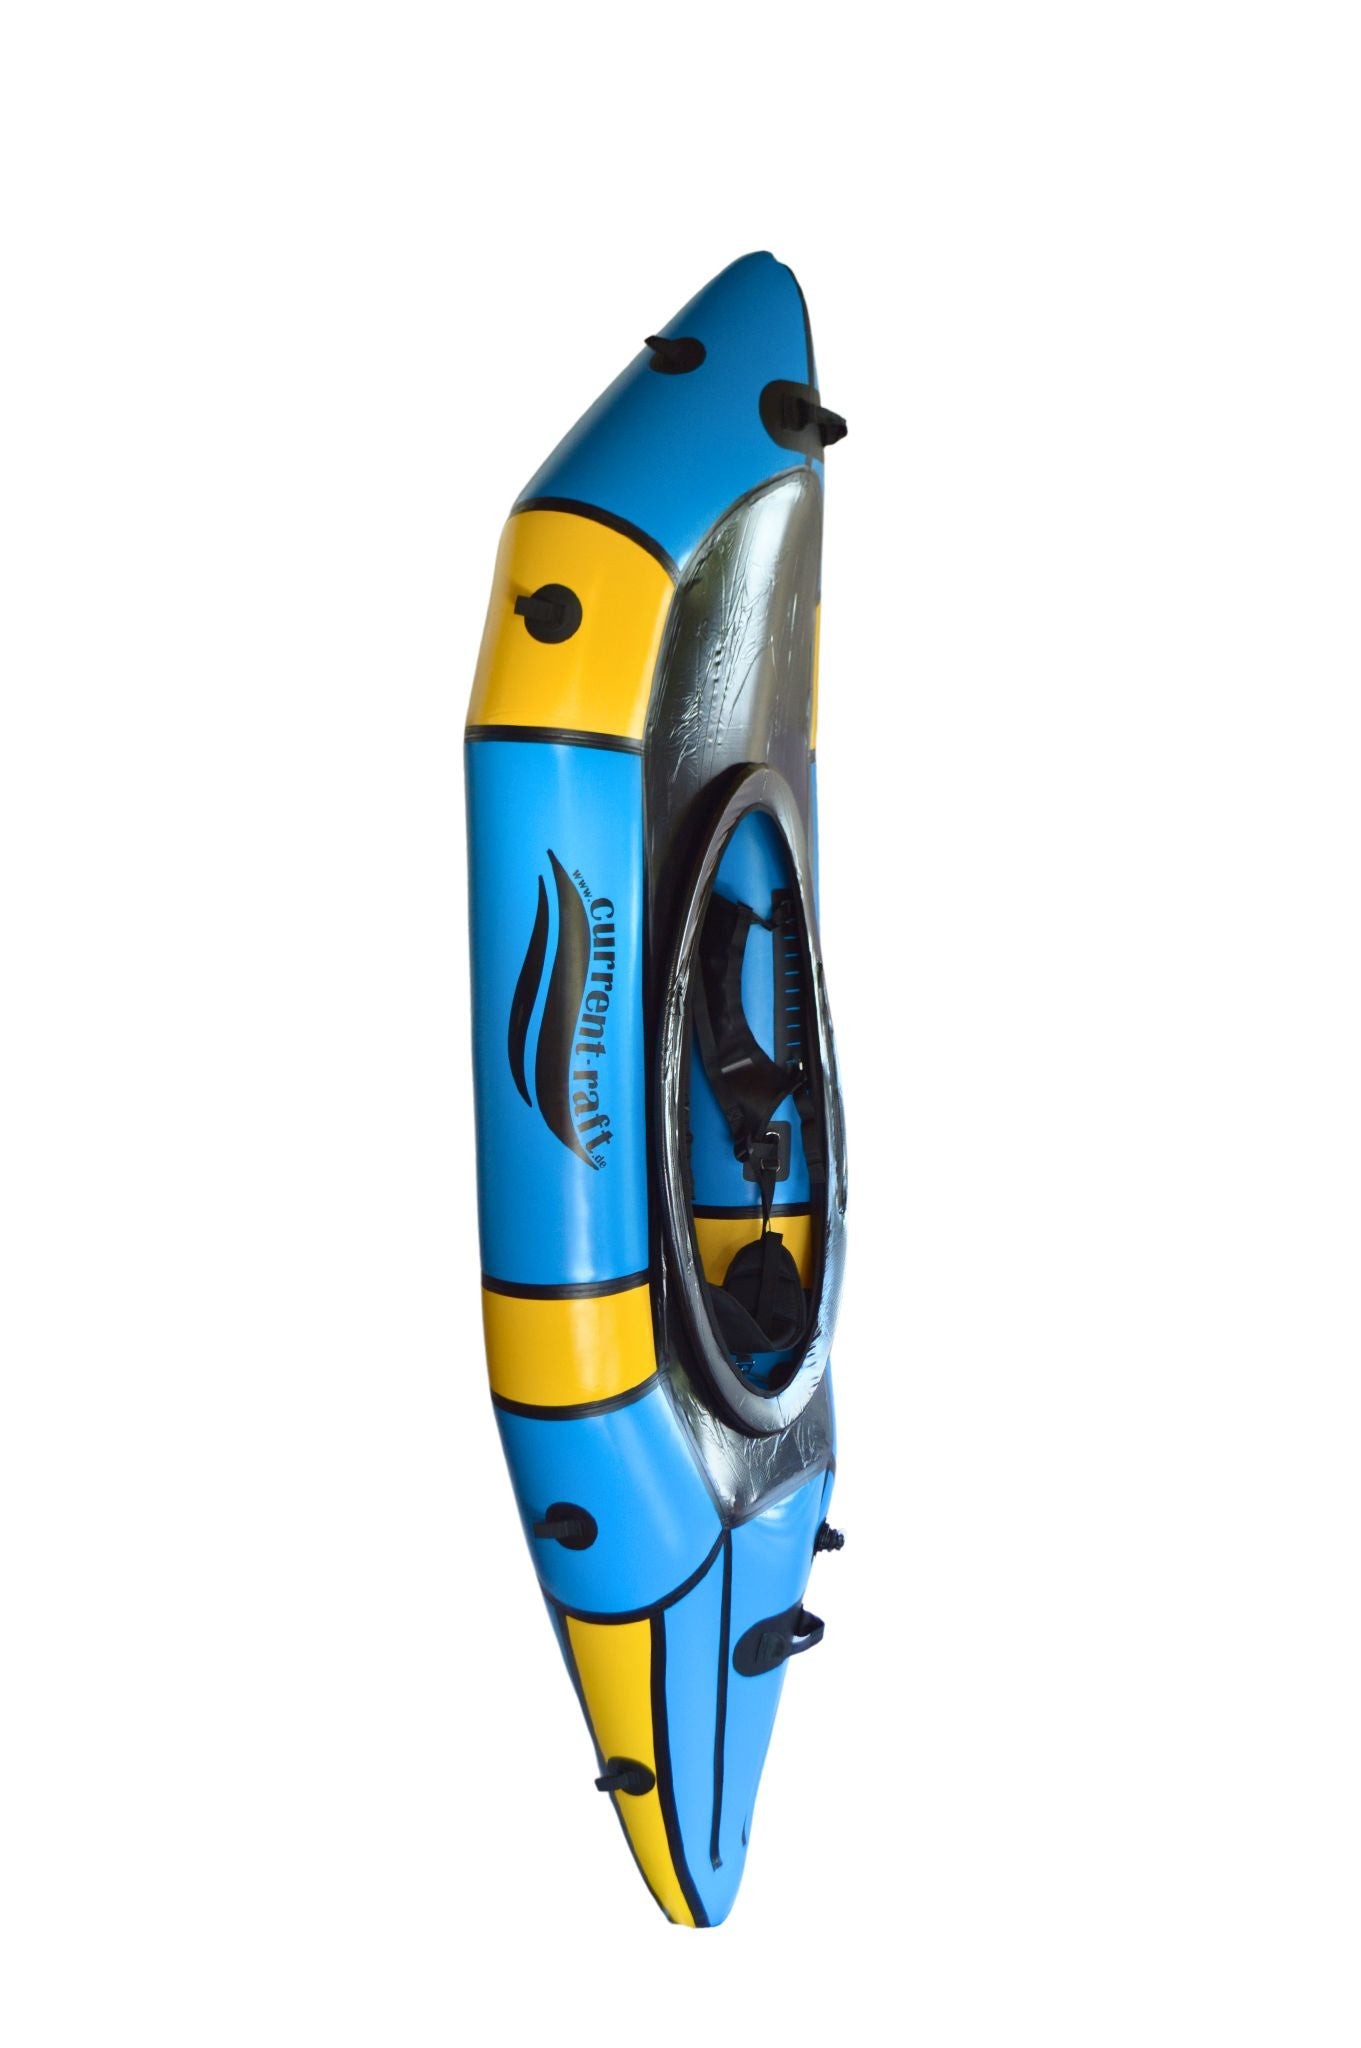 Current Raft Revolution 2.0 270cm Self-bailing with TZIP